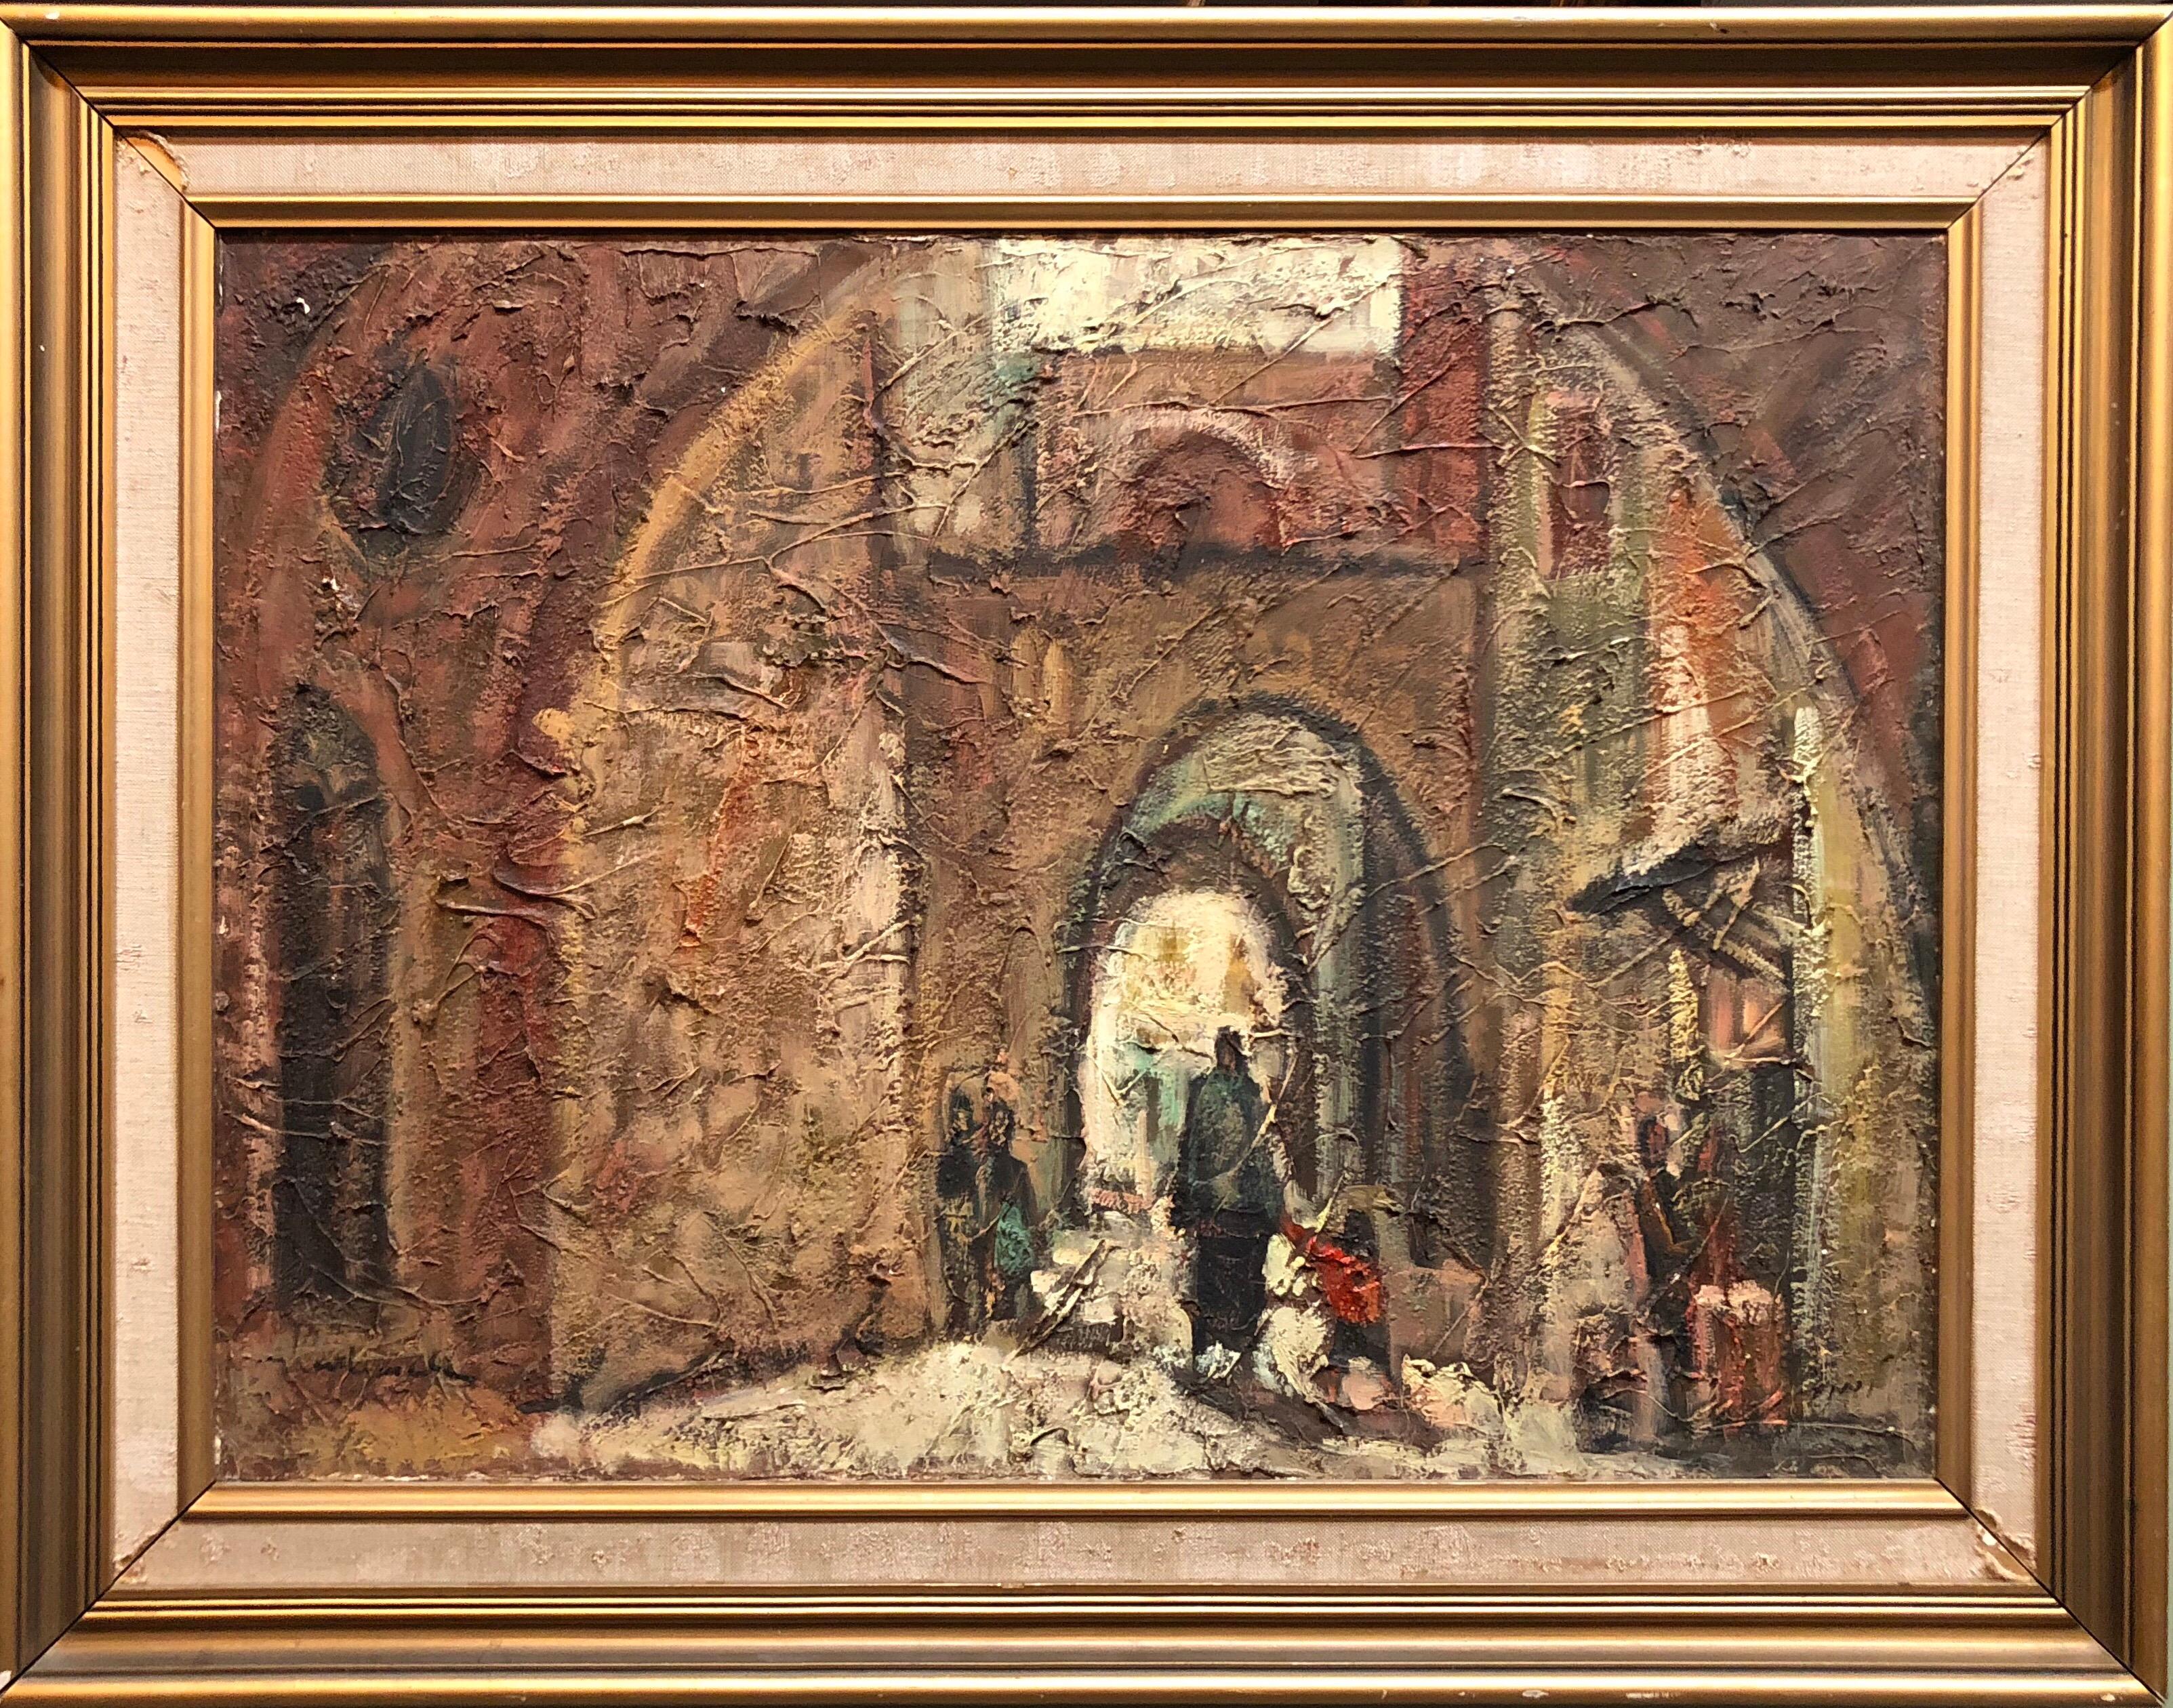 Unknown Landscape Painting - Jerusalem Old City Cityscape Israeli Modernist Oil Painting Signed in Hebrew